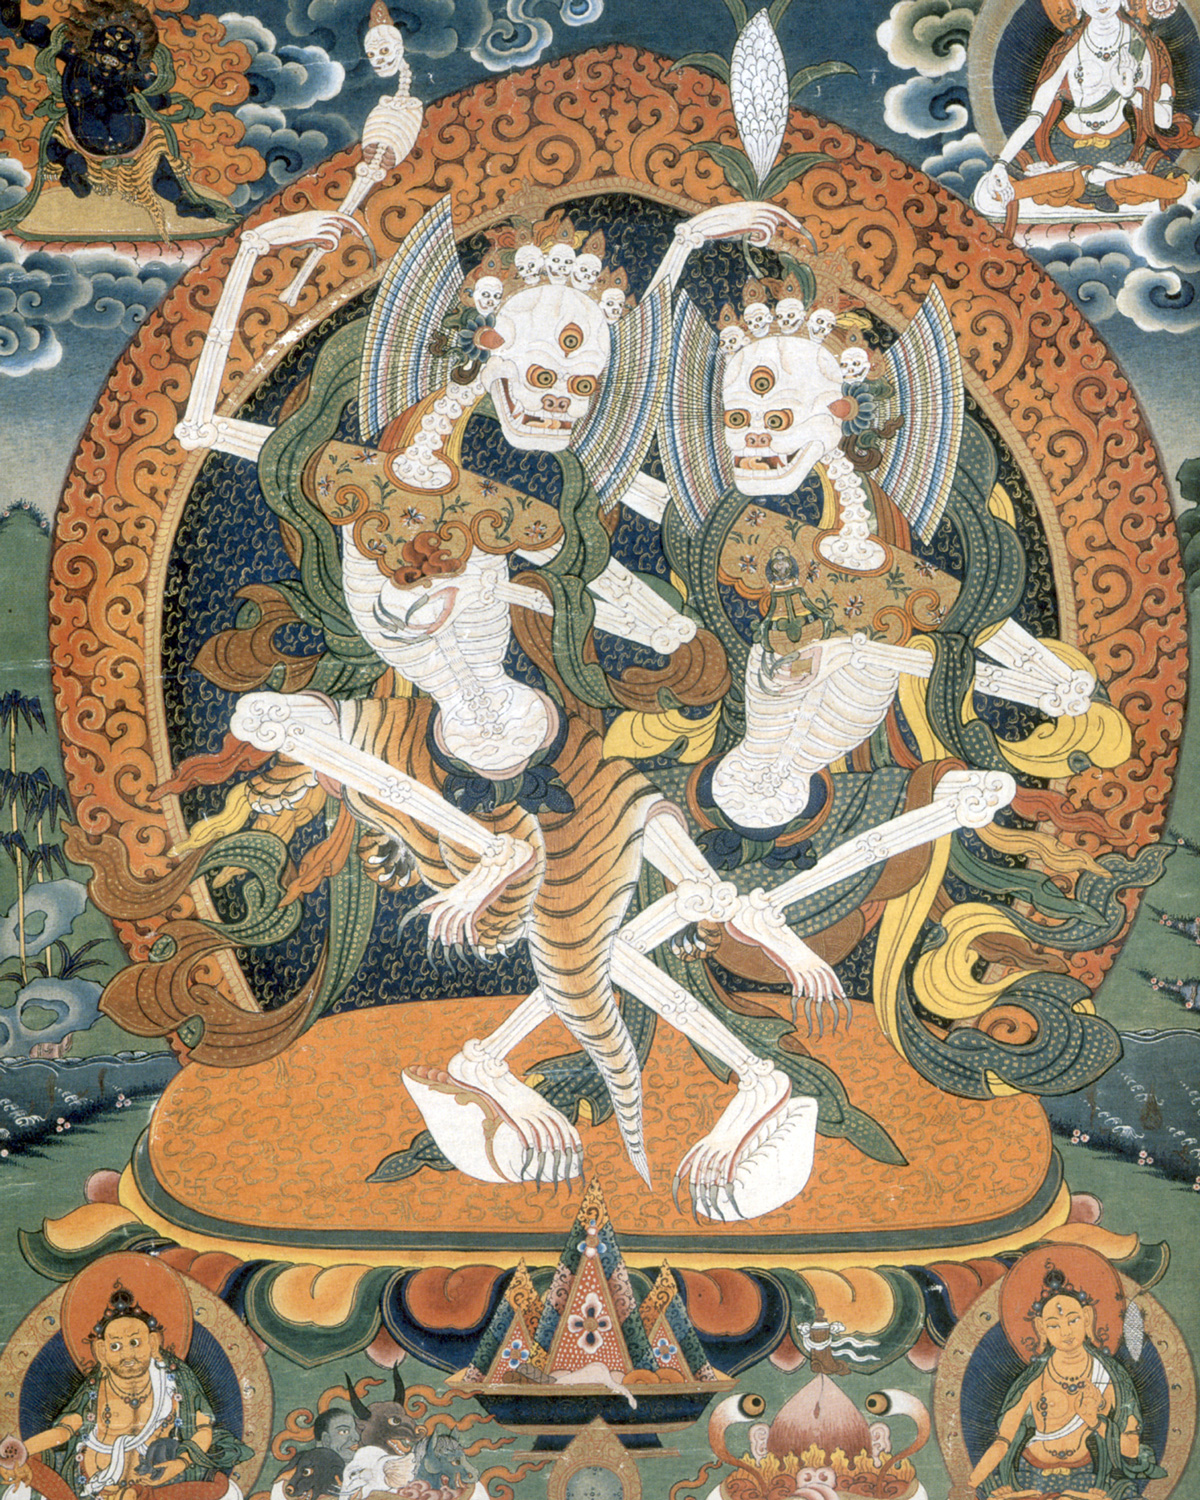 A nineteenth-century Tibetan depiction of the Lords of the Charnel Ground.